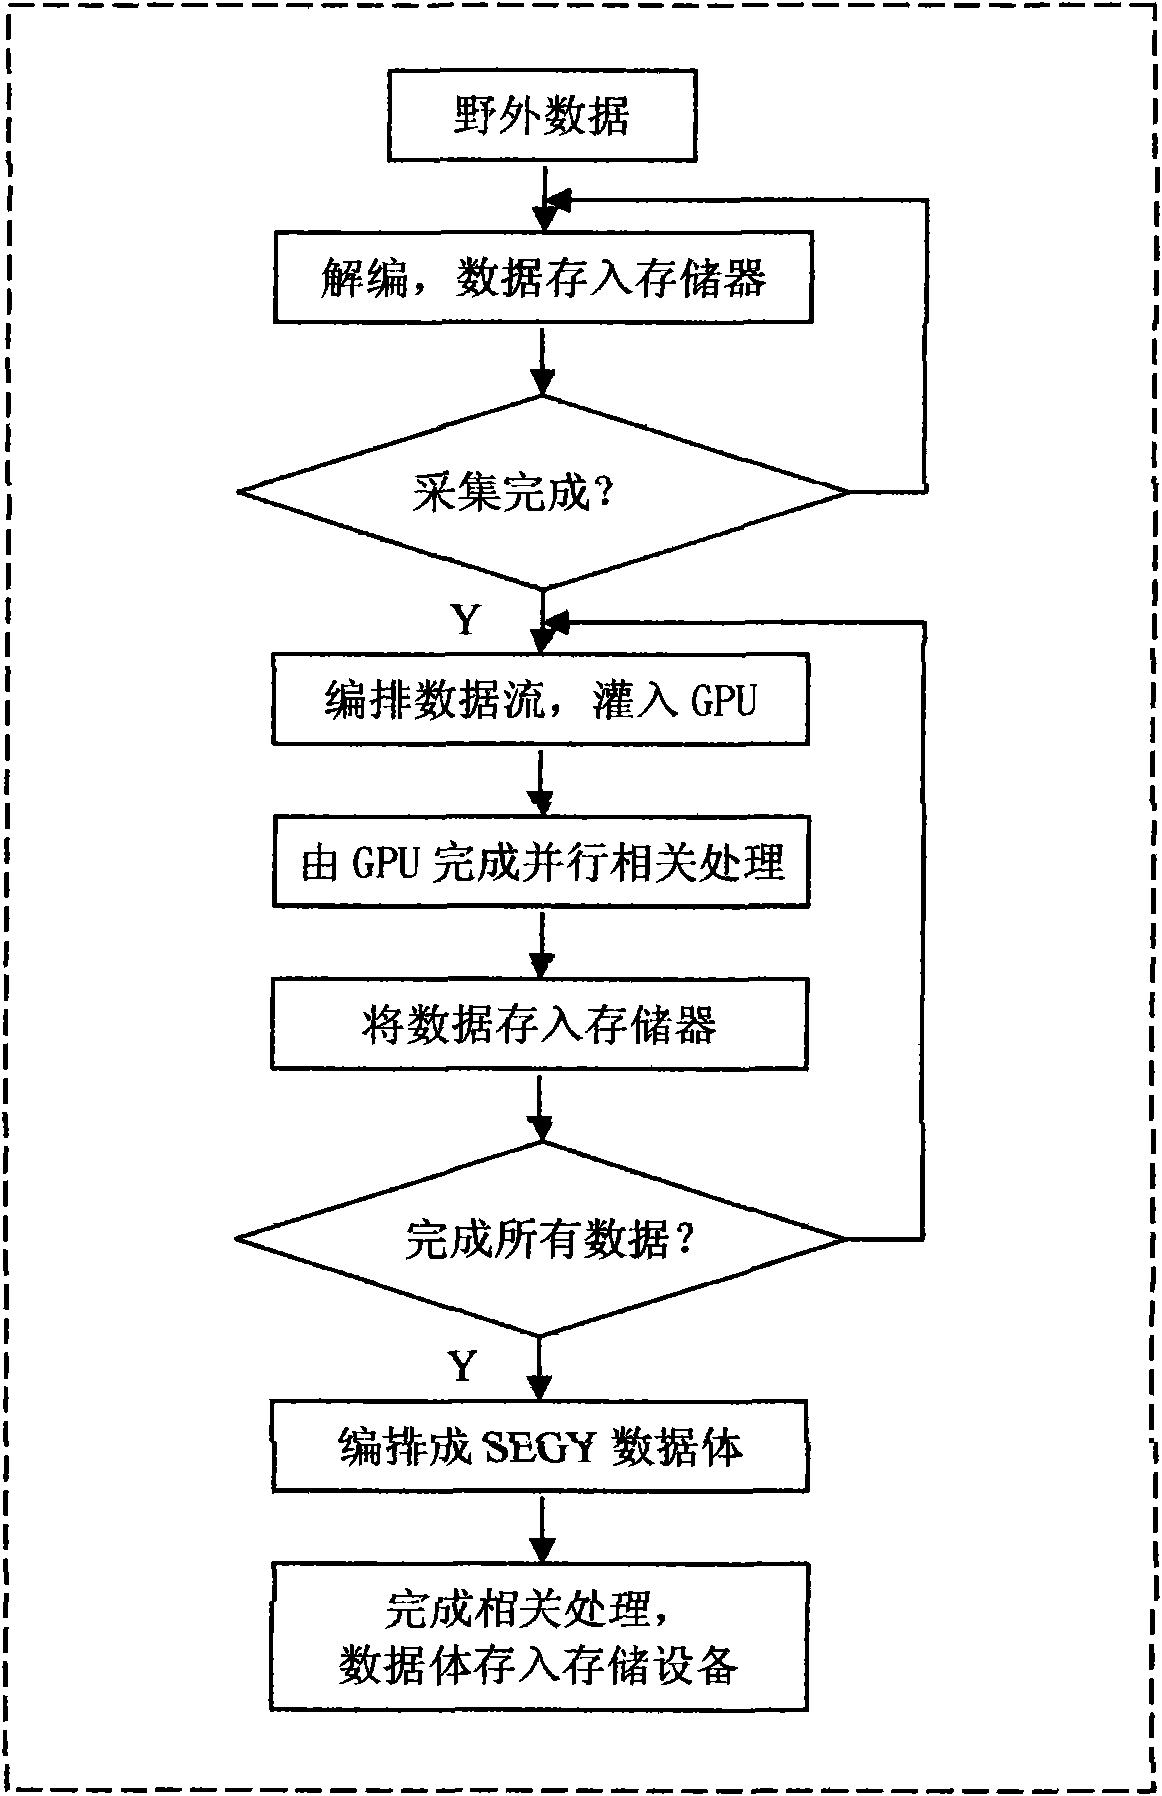 Equipment for correlated processing of vibroseis data in GPU/CPU coordinated mode and method thereof